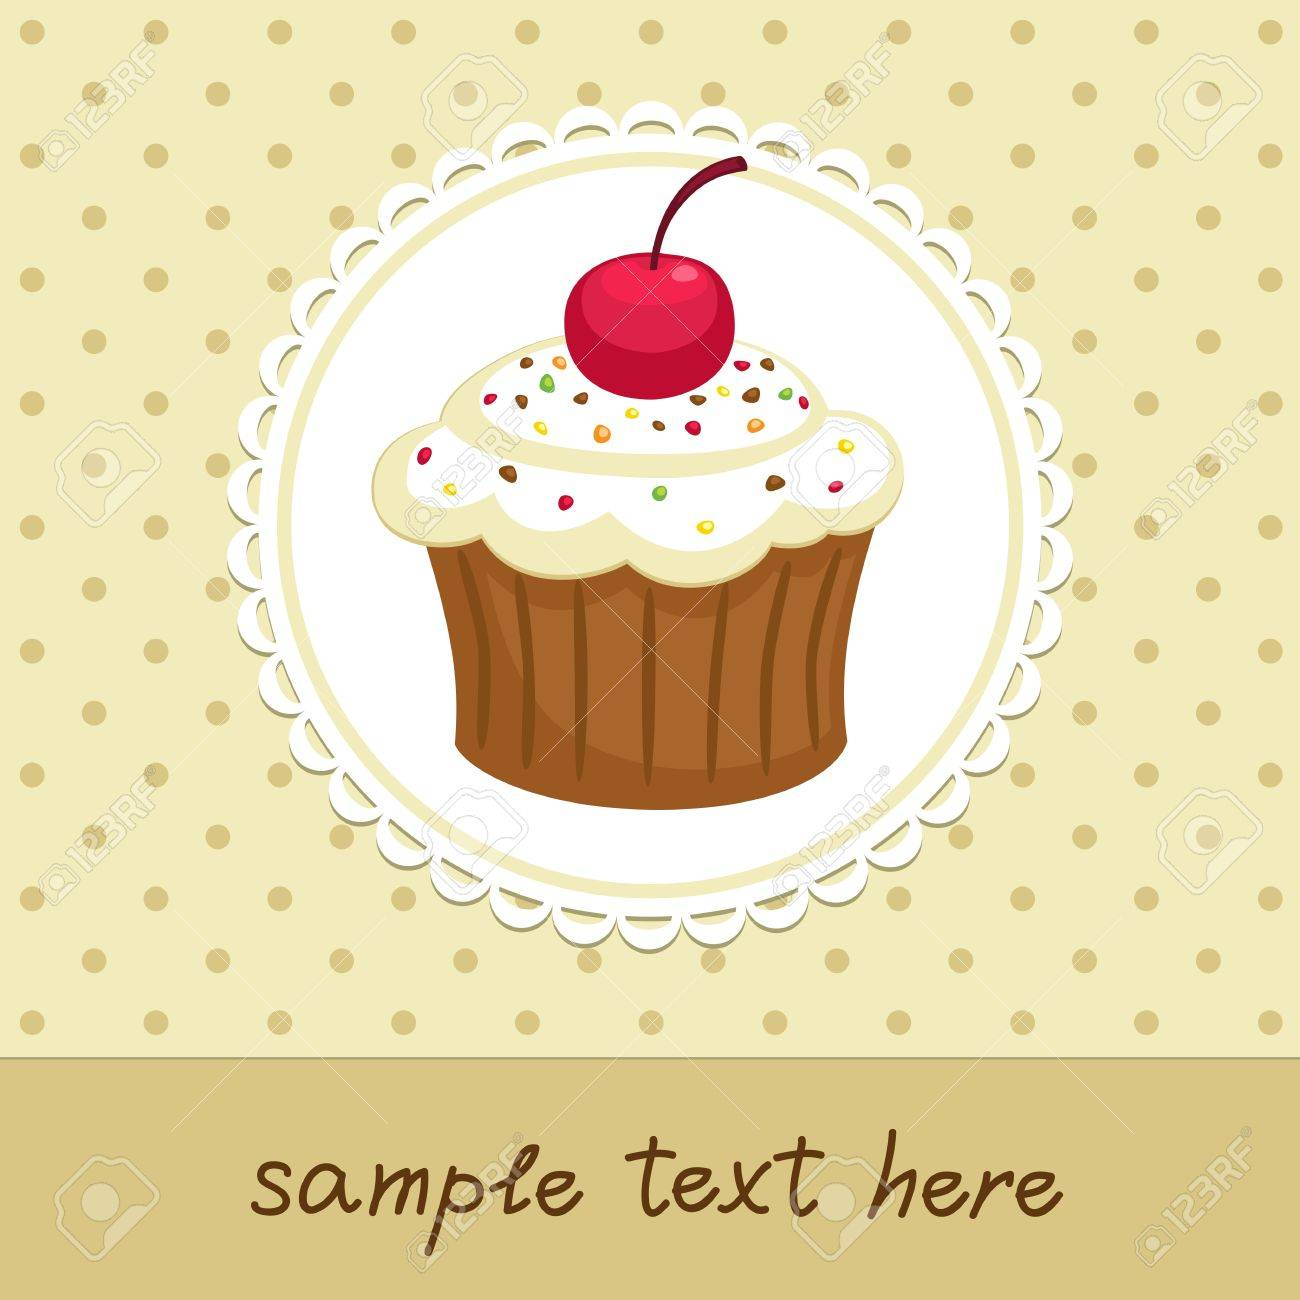 Vintage Background With Cupcake Invitation Template Illustration intended for measurements 1300 X 1300